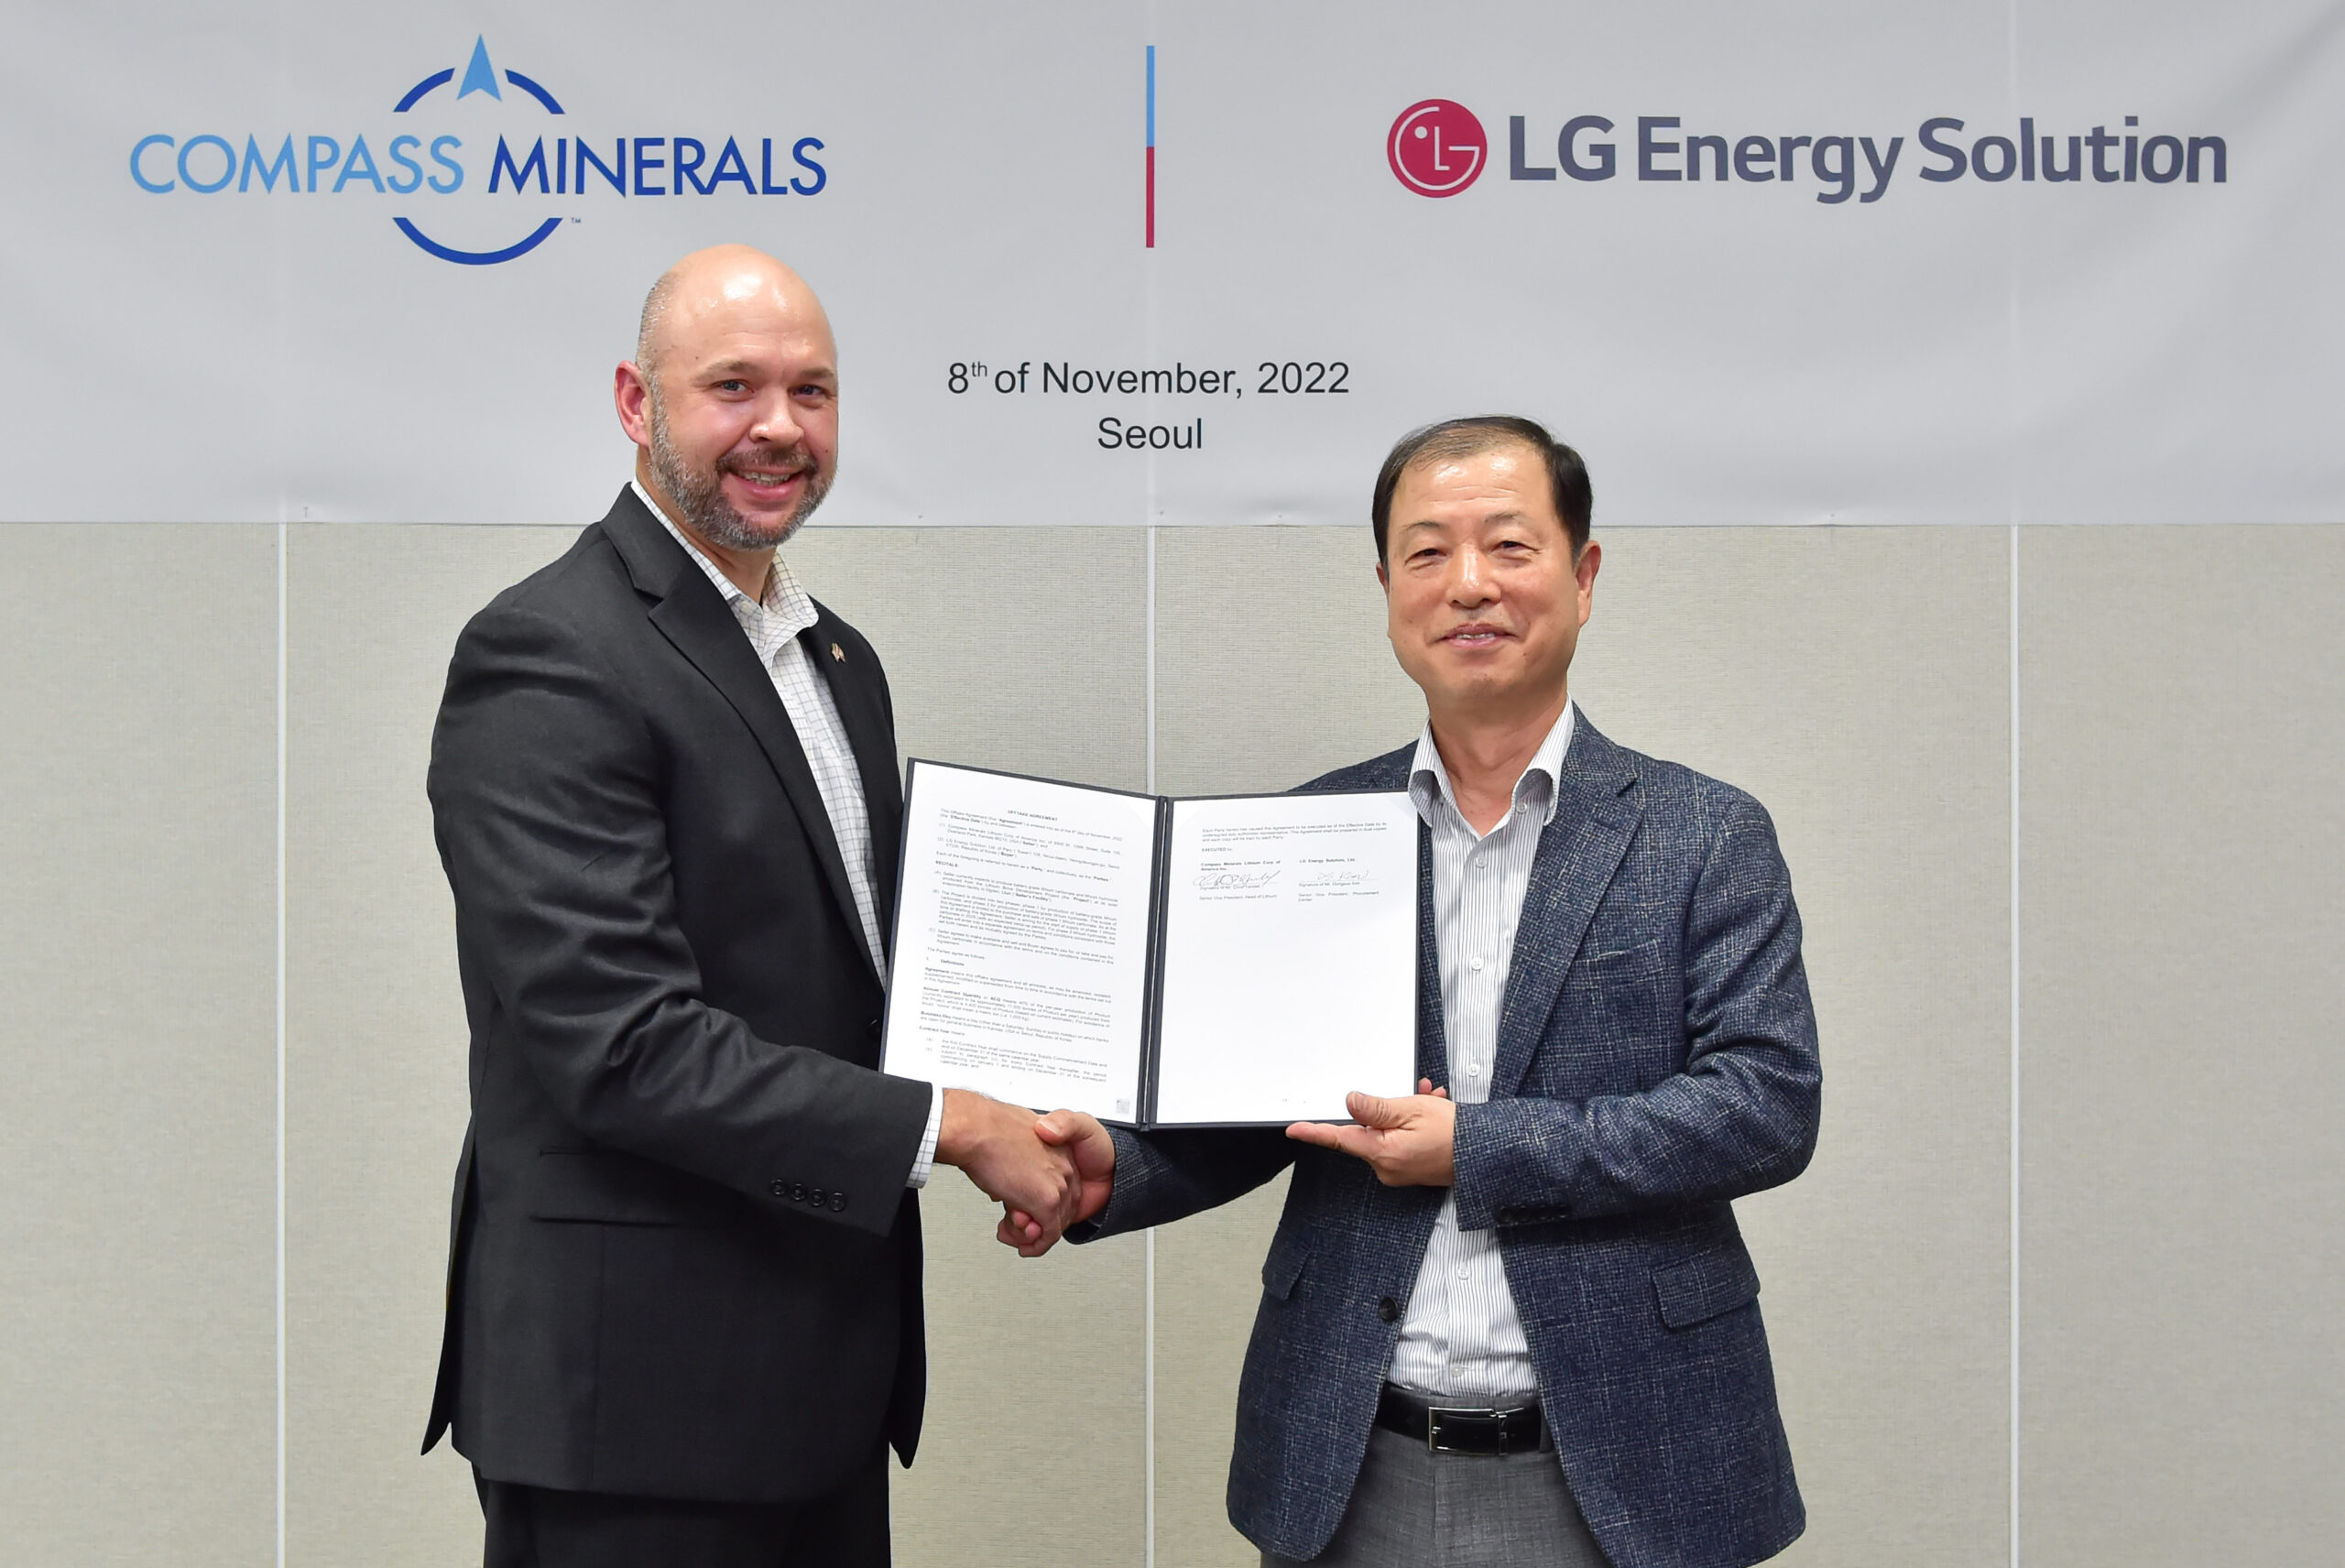 lg-energy-solution-secures-multi-year-lithium-carbonate-supply-from-compass-minerals_1.jpg